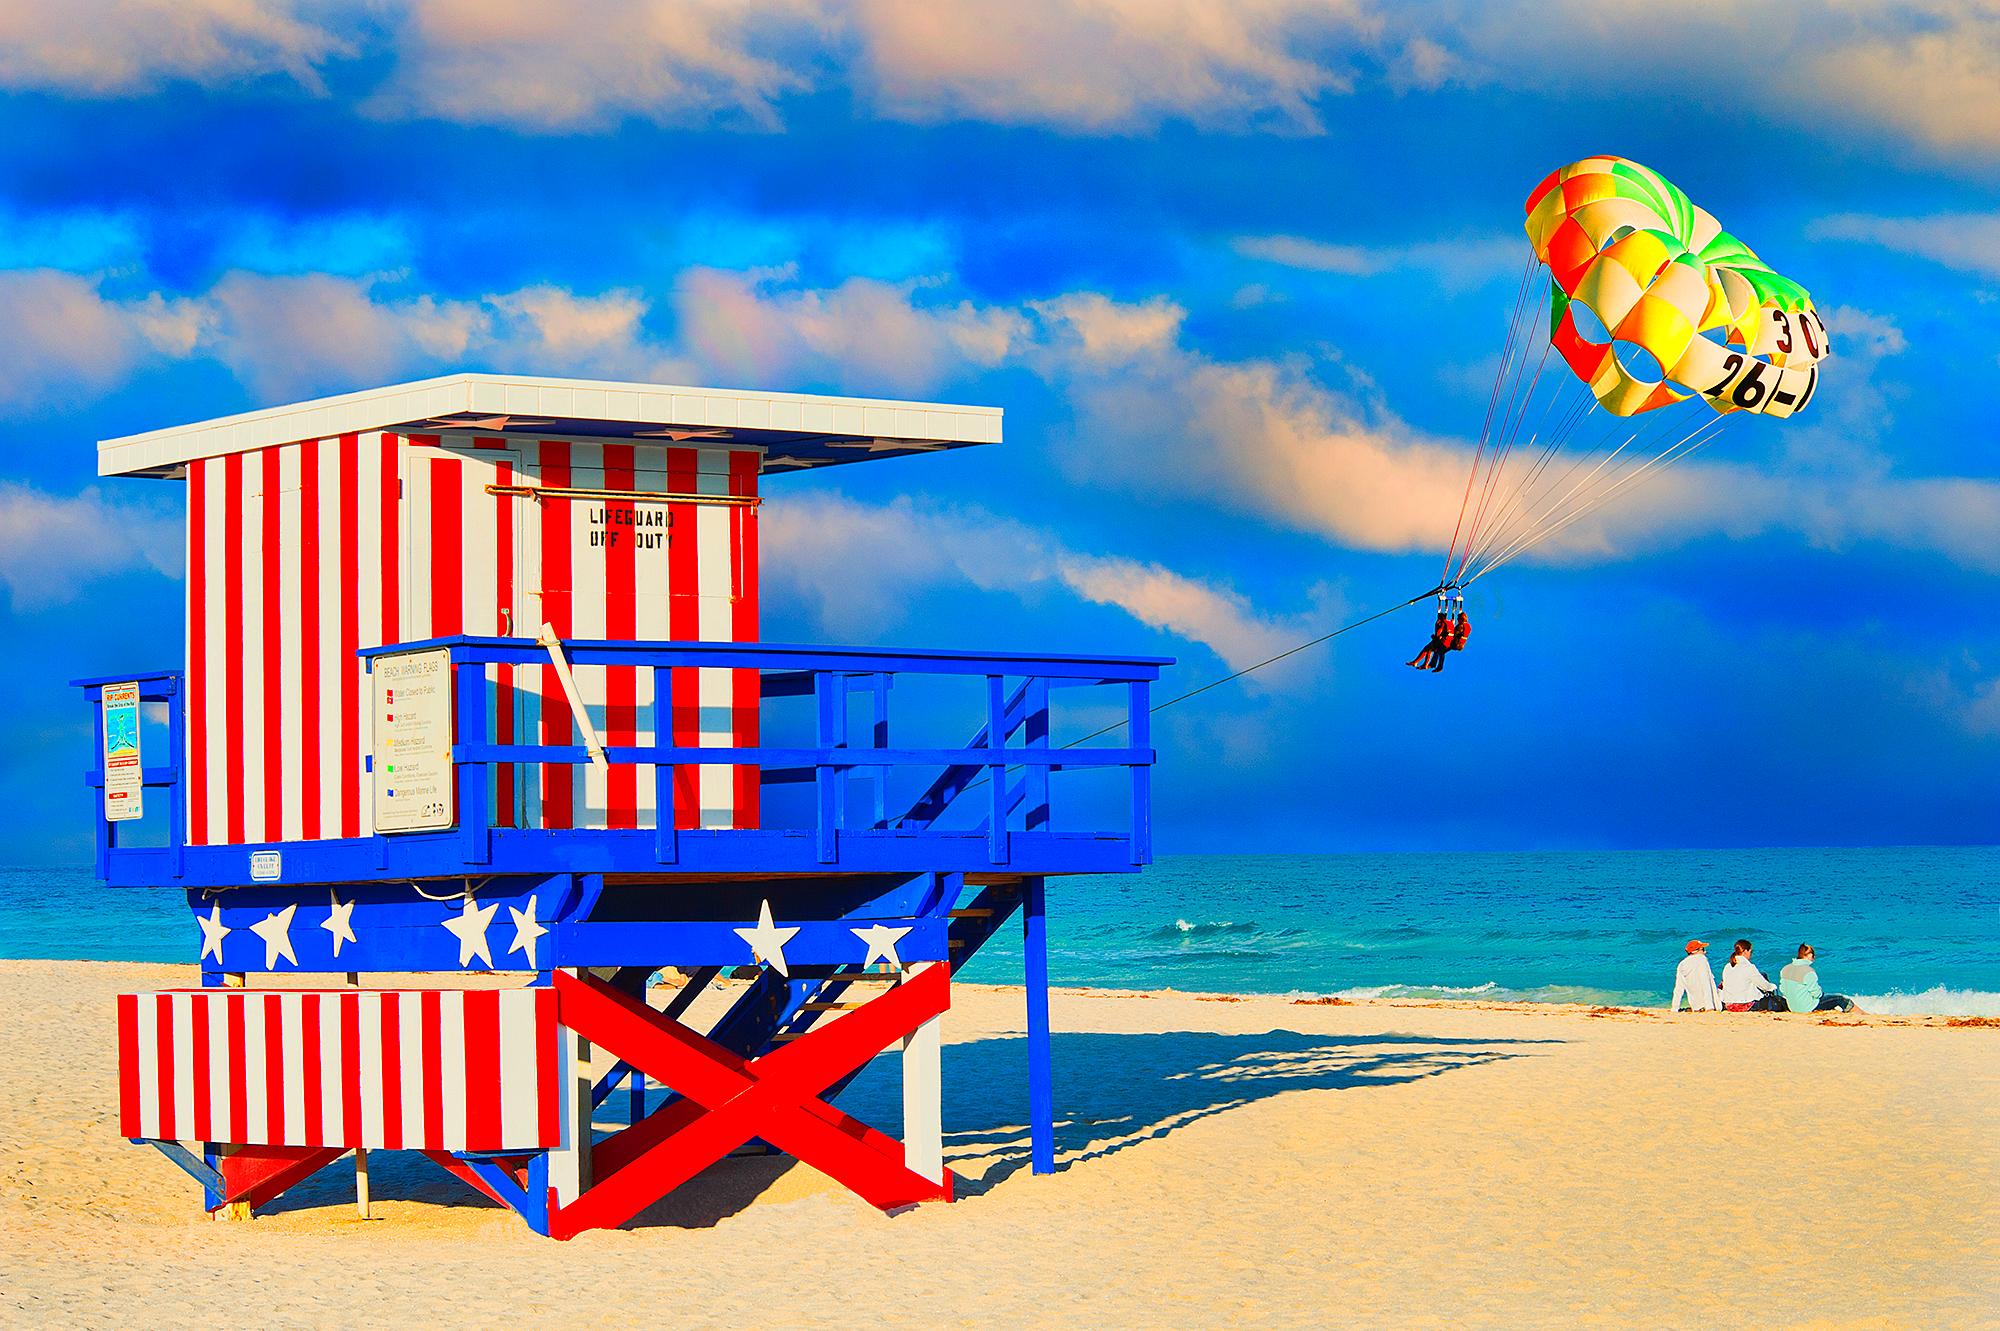 Mitchell Funk Color Photograph - Miami Beach  Lifeguard Tower